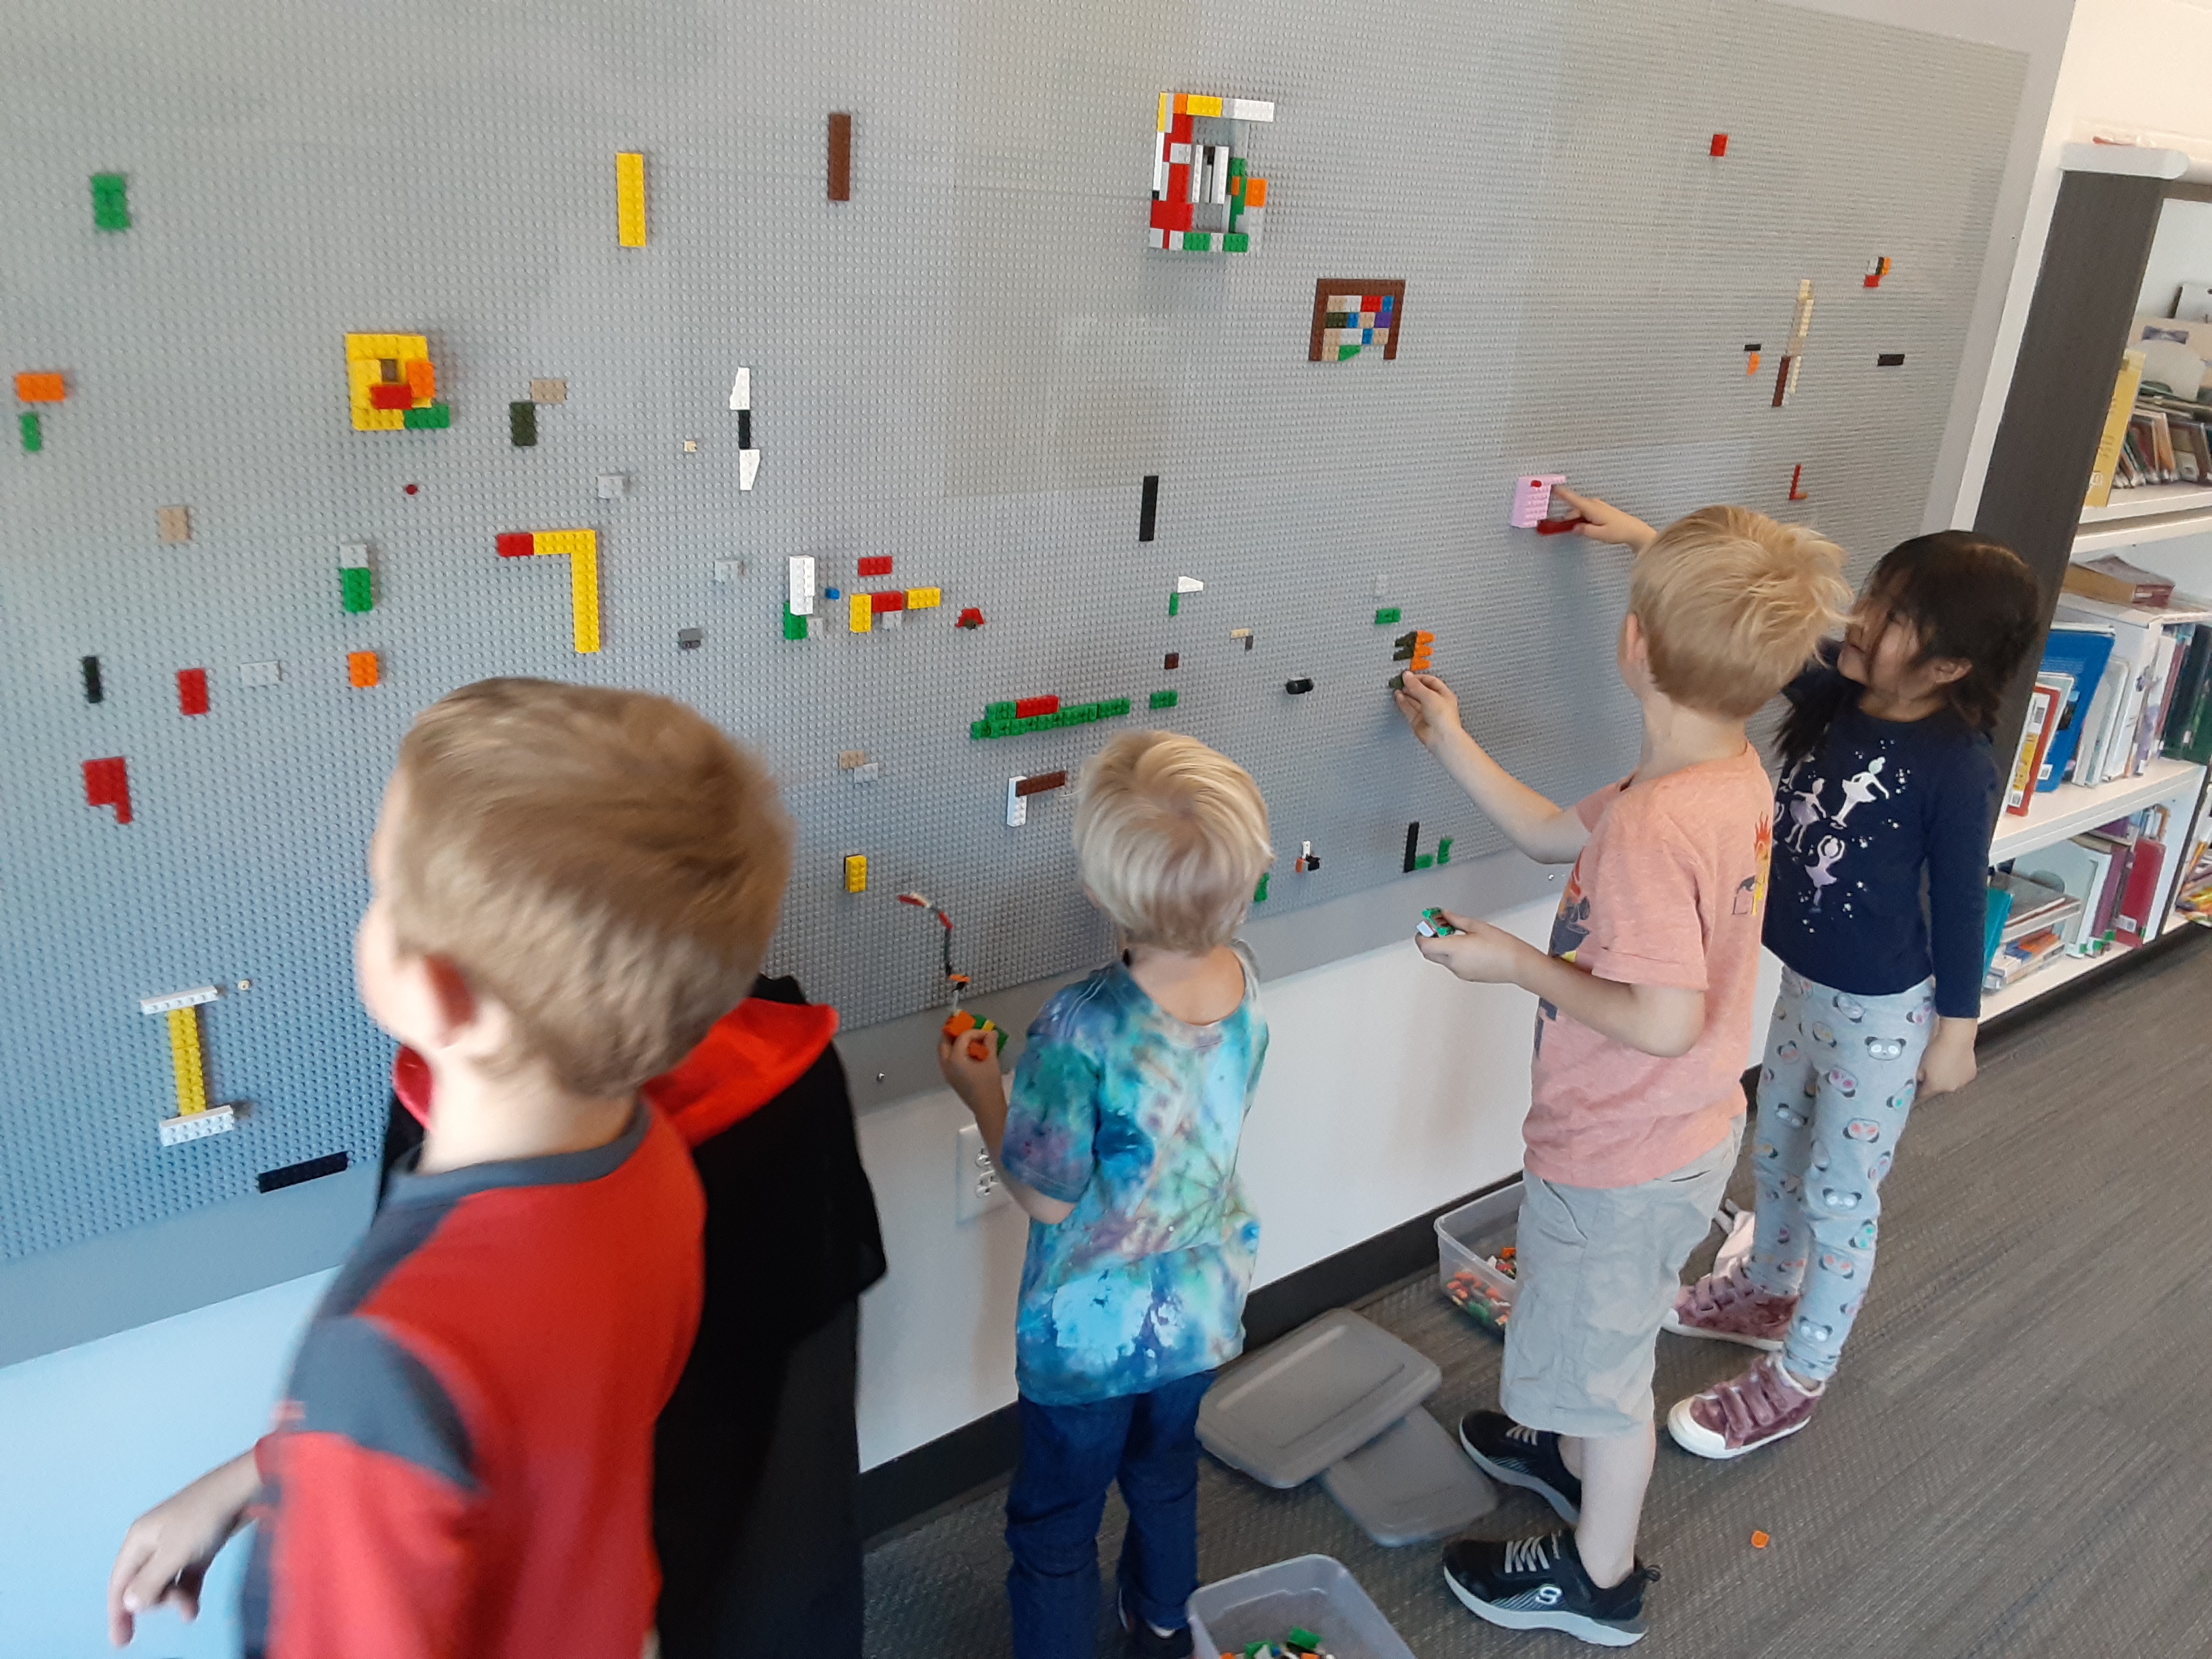 Students standing by the Lego wall